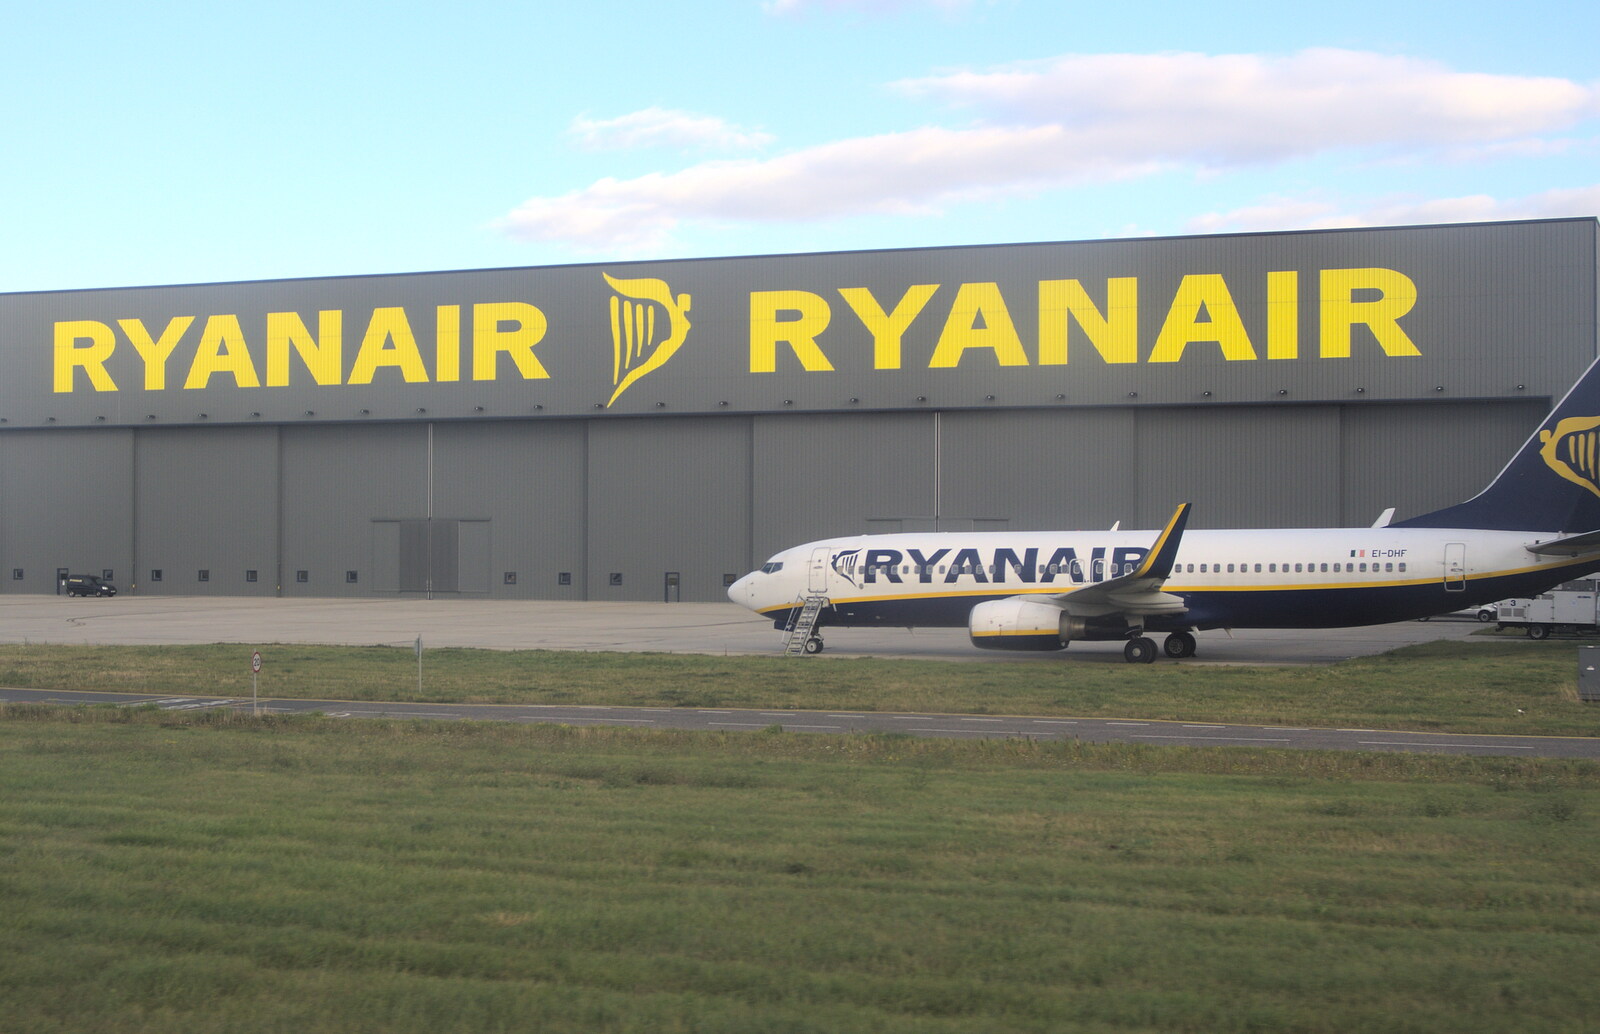 Ryanair's massive hangars at Stansted from A Few Hours in Valdemossa, Mallorca, Spain - 13th September 2012